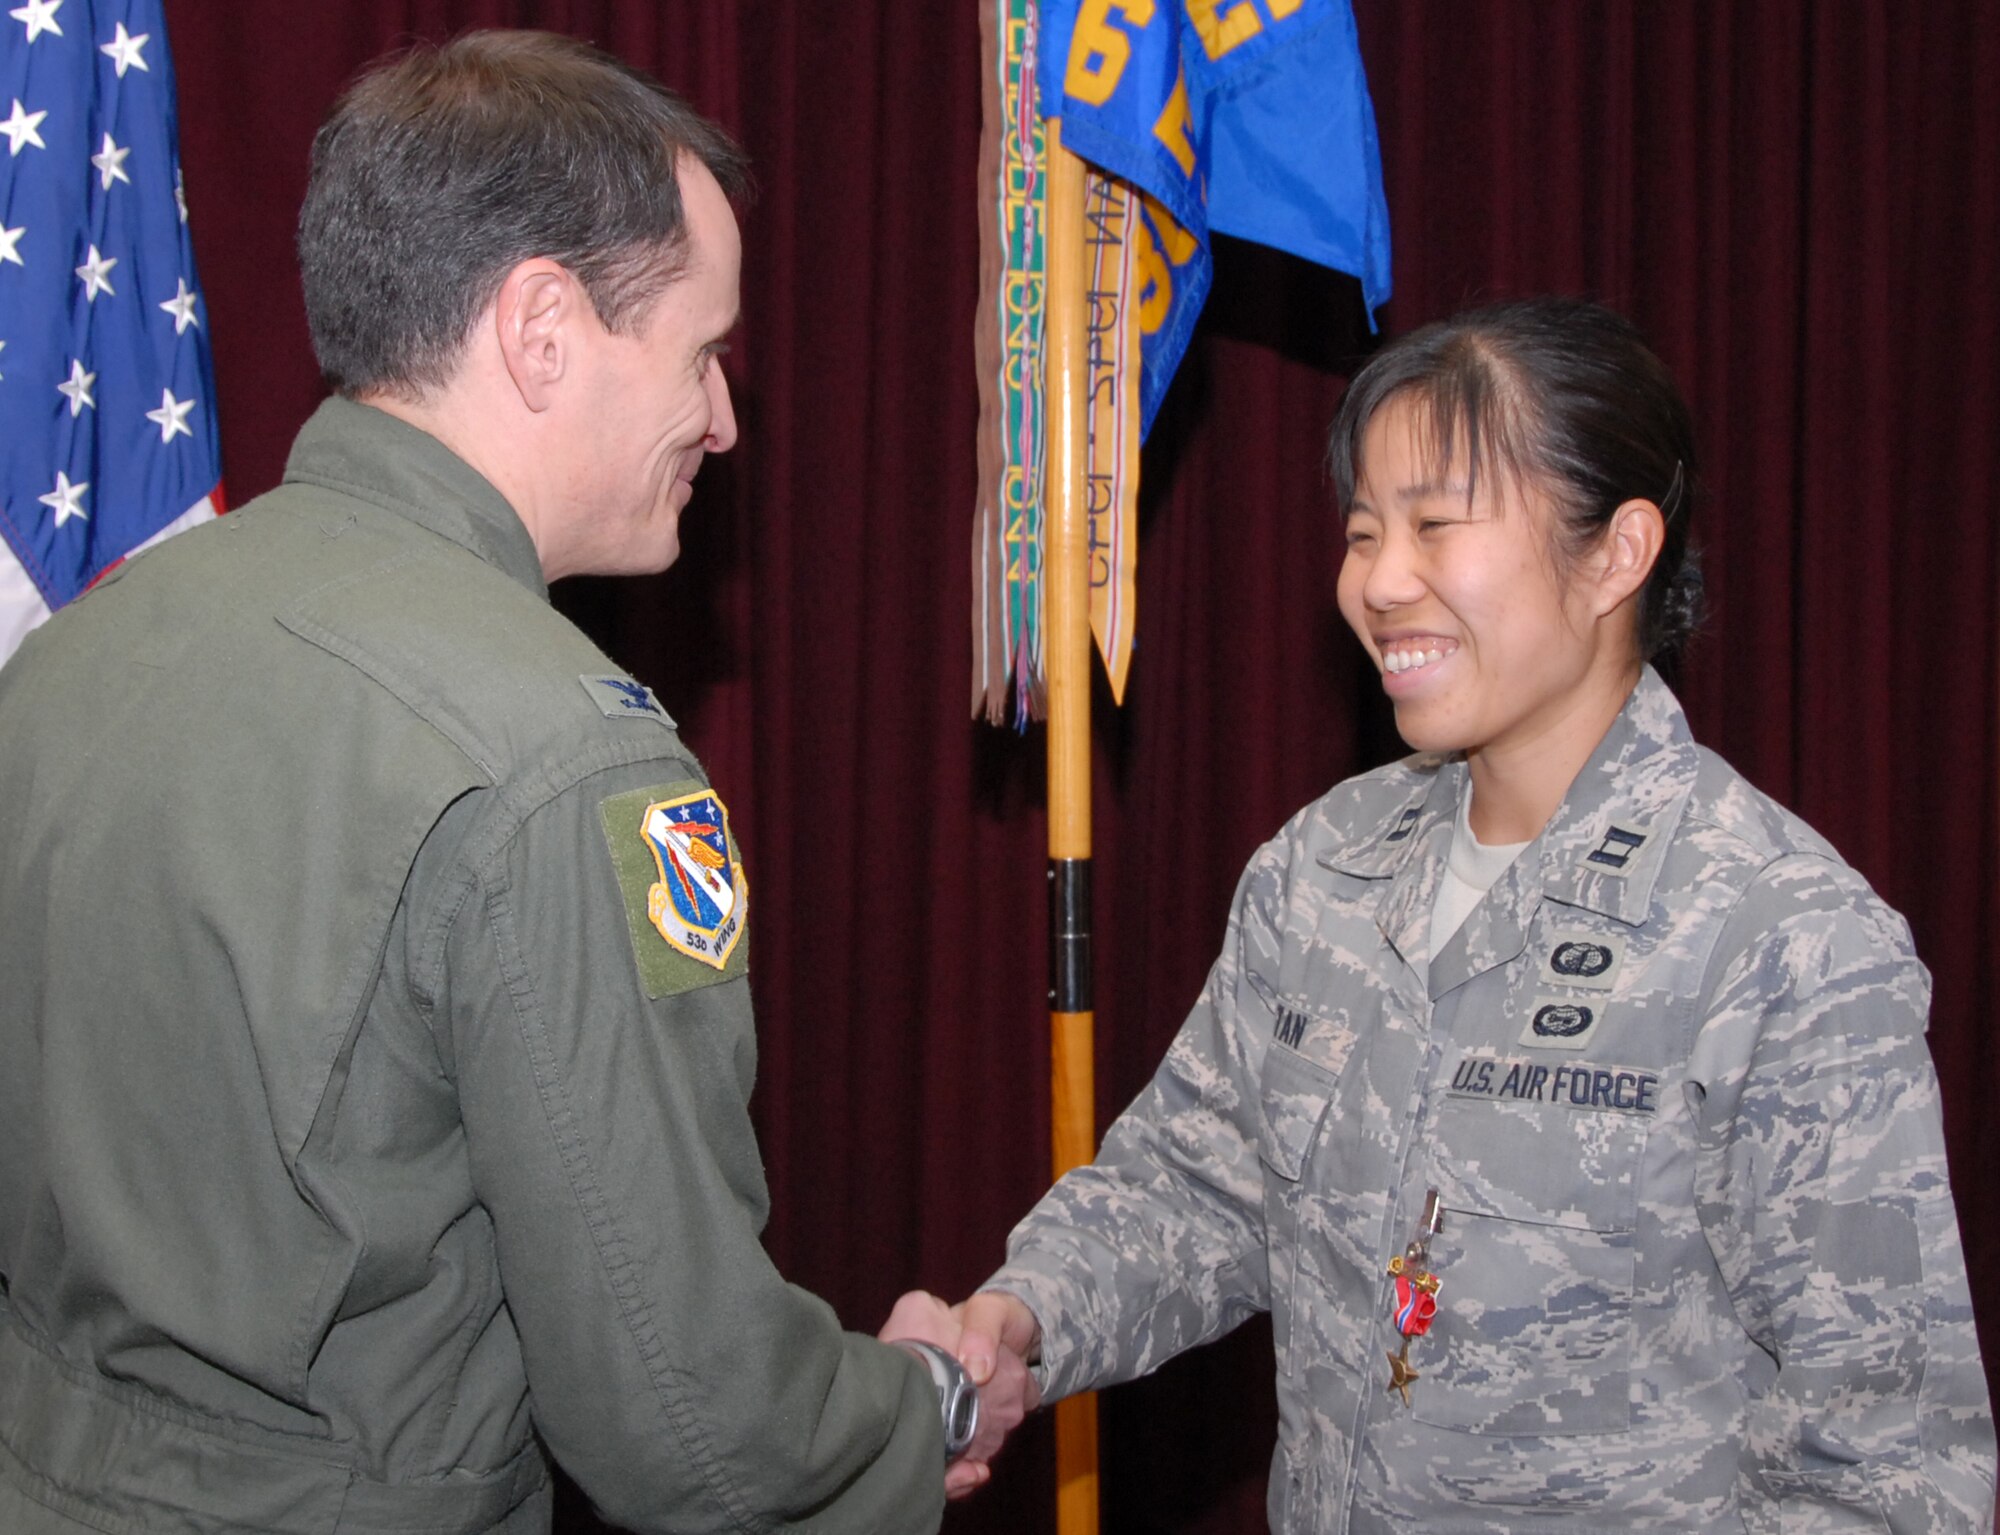 Capt. Pamela Tan, 36th Electronic Warfare Squadron, thanks Col. Steve DePalmer, 53d Wing commander,  after receiving her Bronze Star medal Jan. 22 during a 36 EWS commander's call.  She received the medal for her accomplishments as a Electronic Warfare Officer deployed with a Army battalion in Iraq.  (U.S. Air Force photo/Samuel King Jr.)